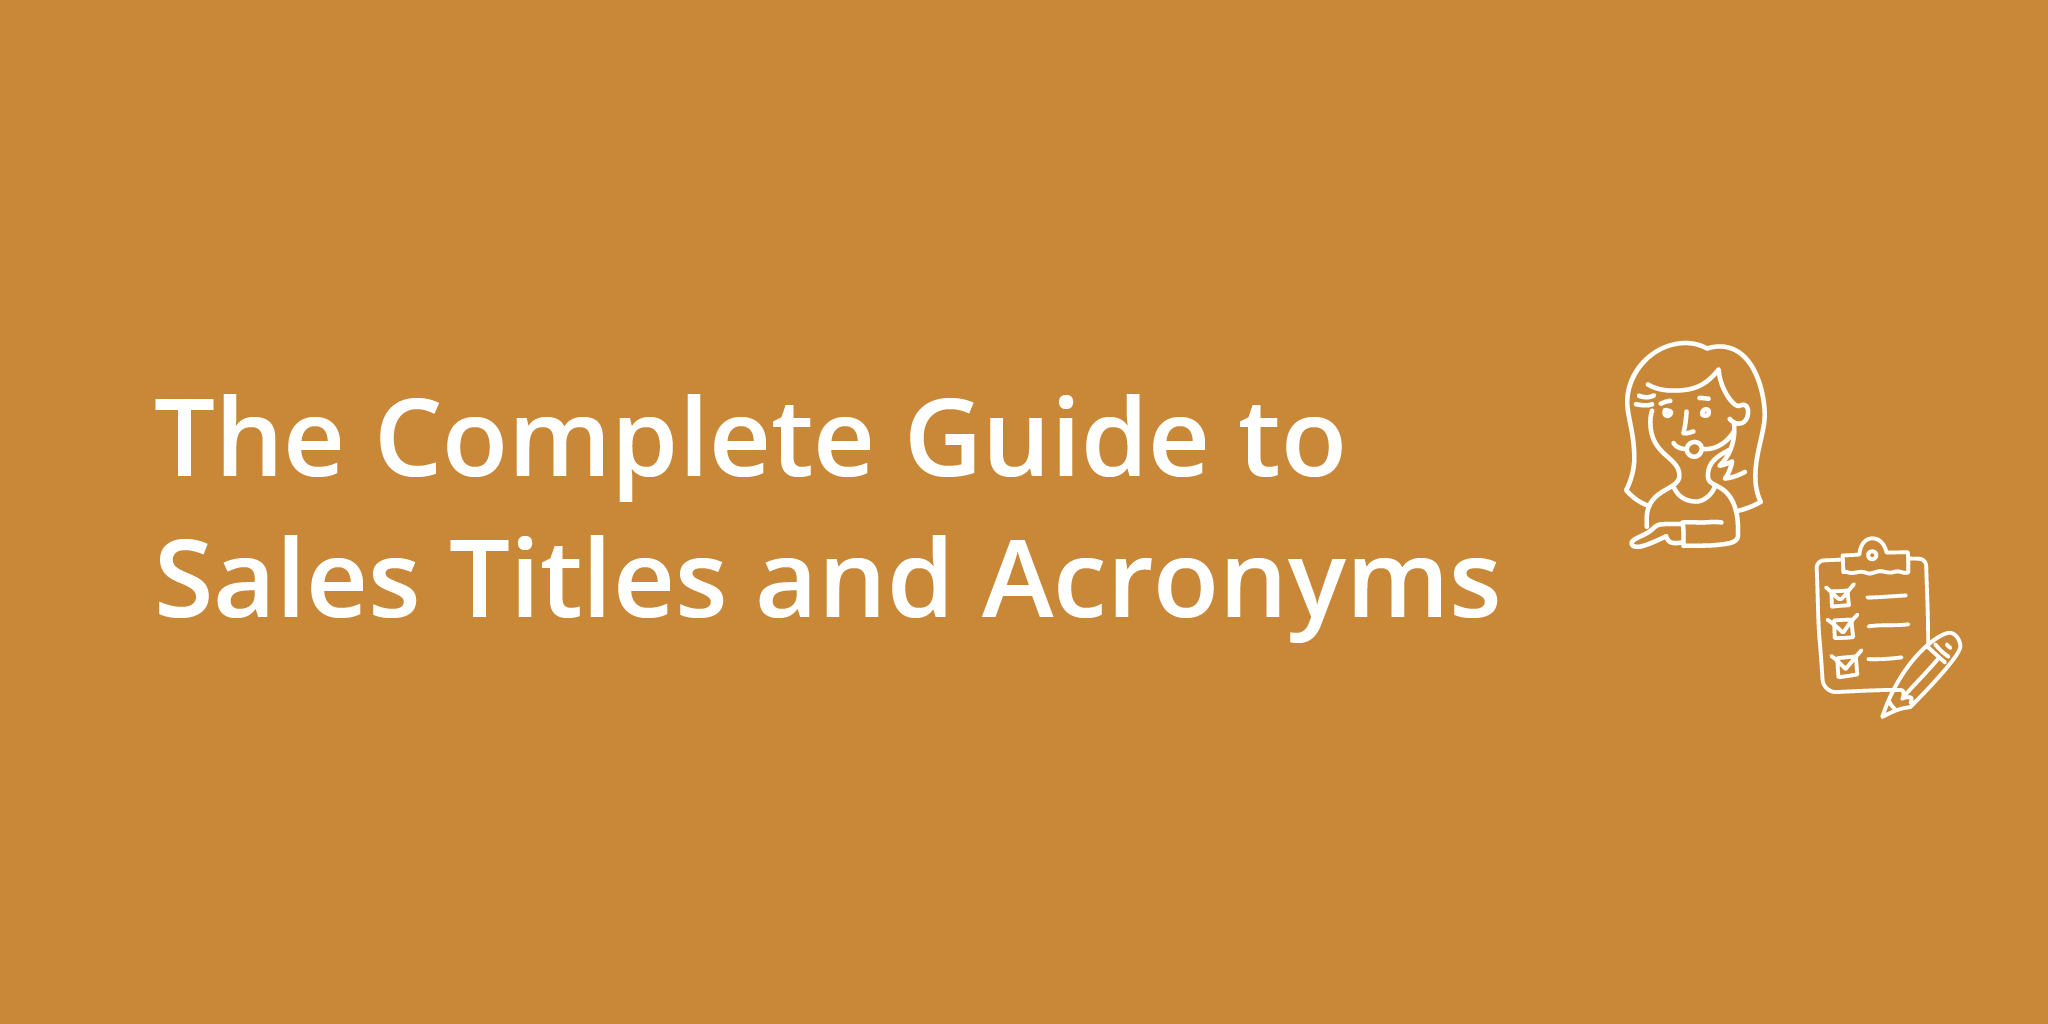 The Complete Guide to Sales Titles and Acronyms | Telephones for business